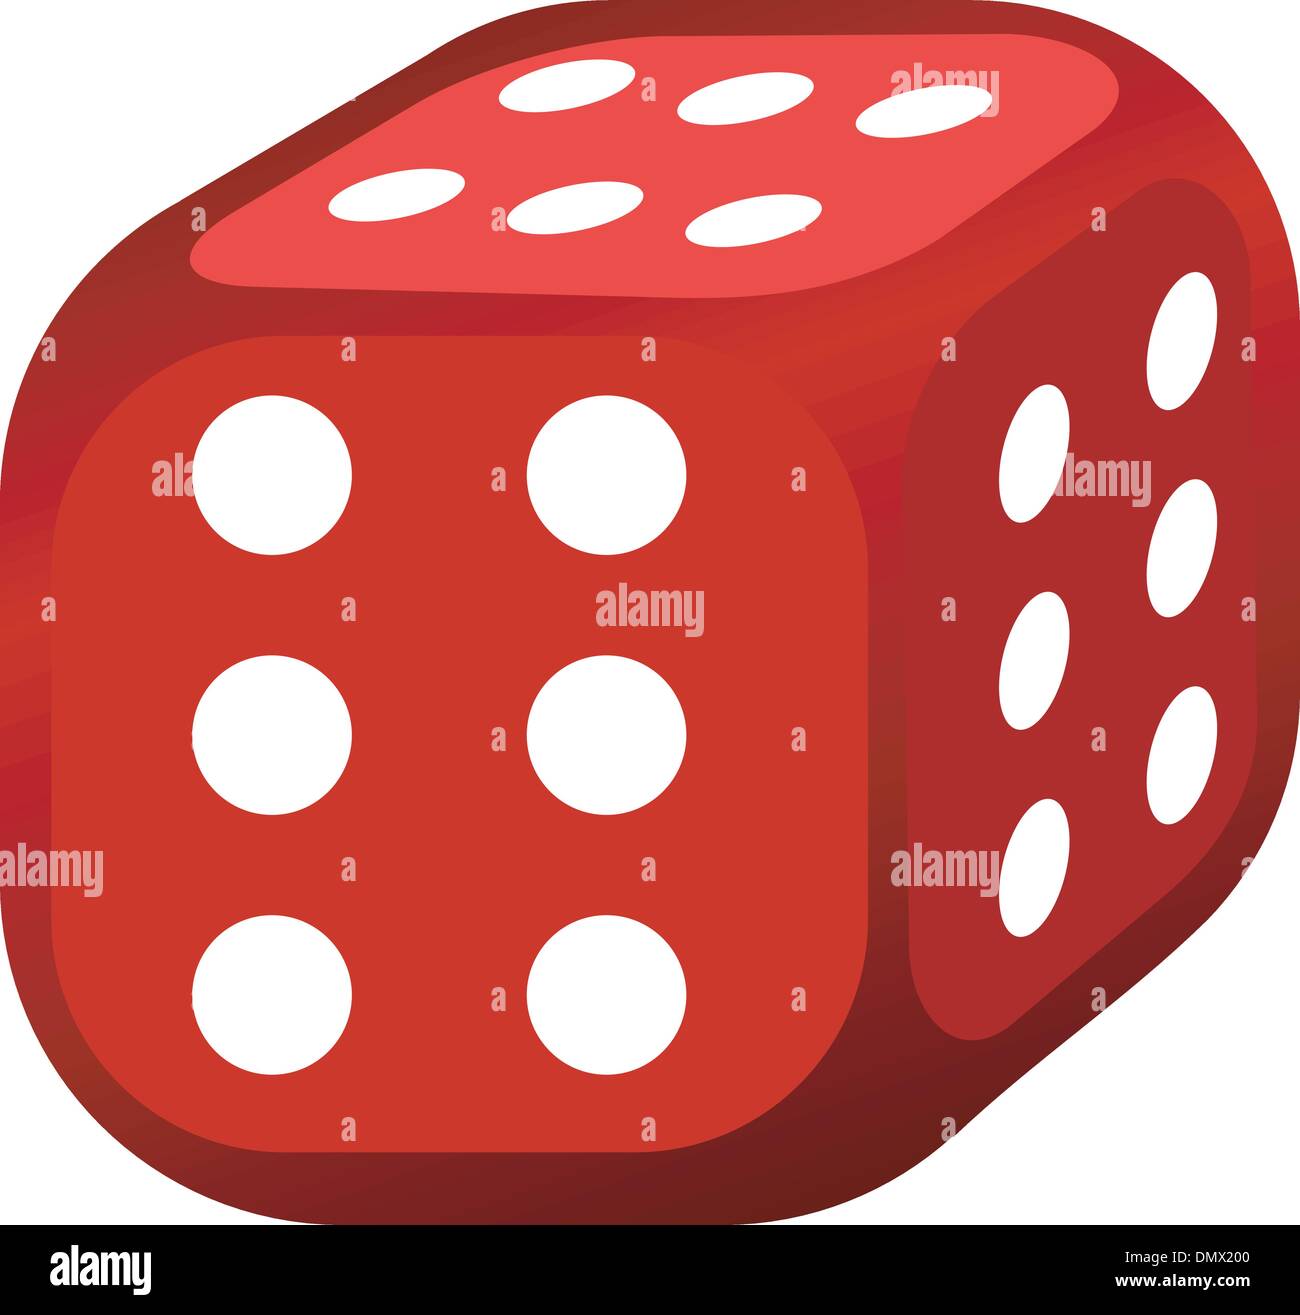 Vector illustration of abstract dice Stock Vector